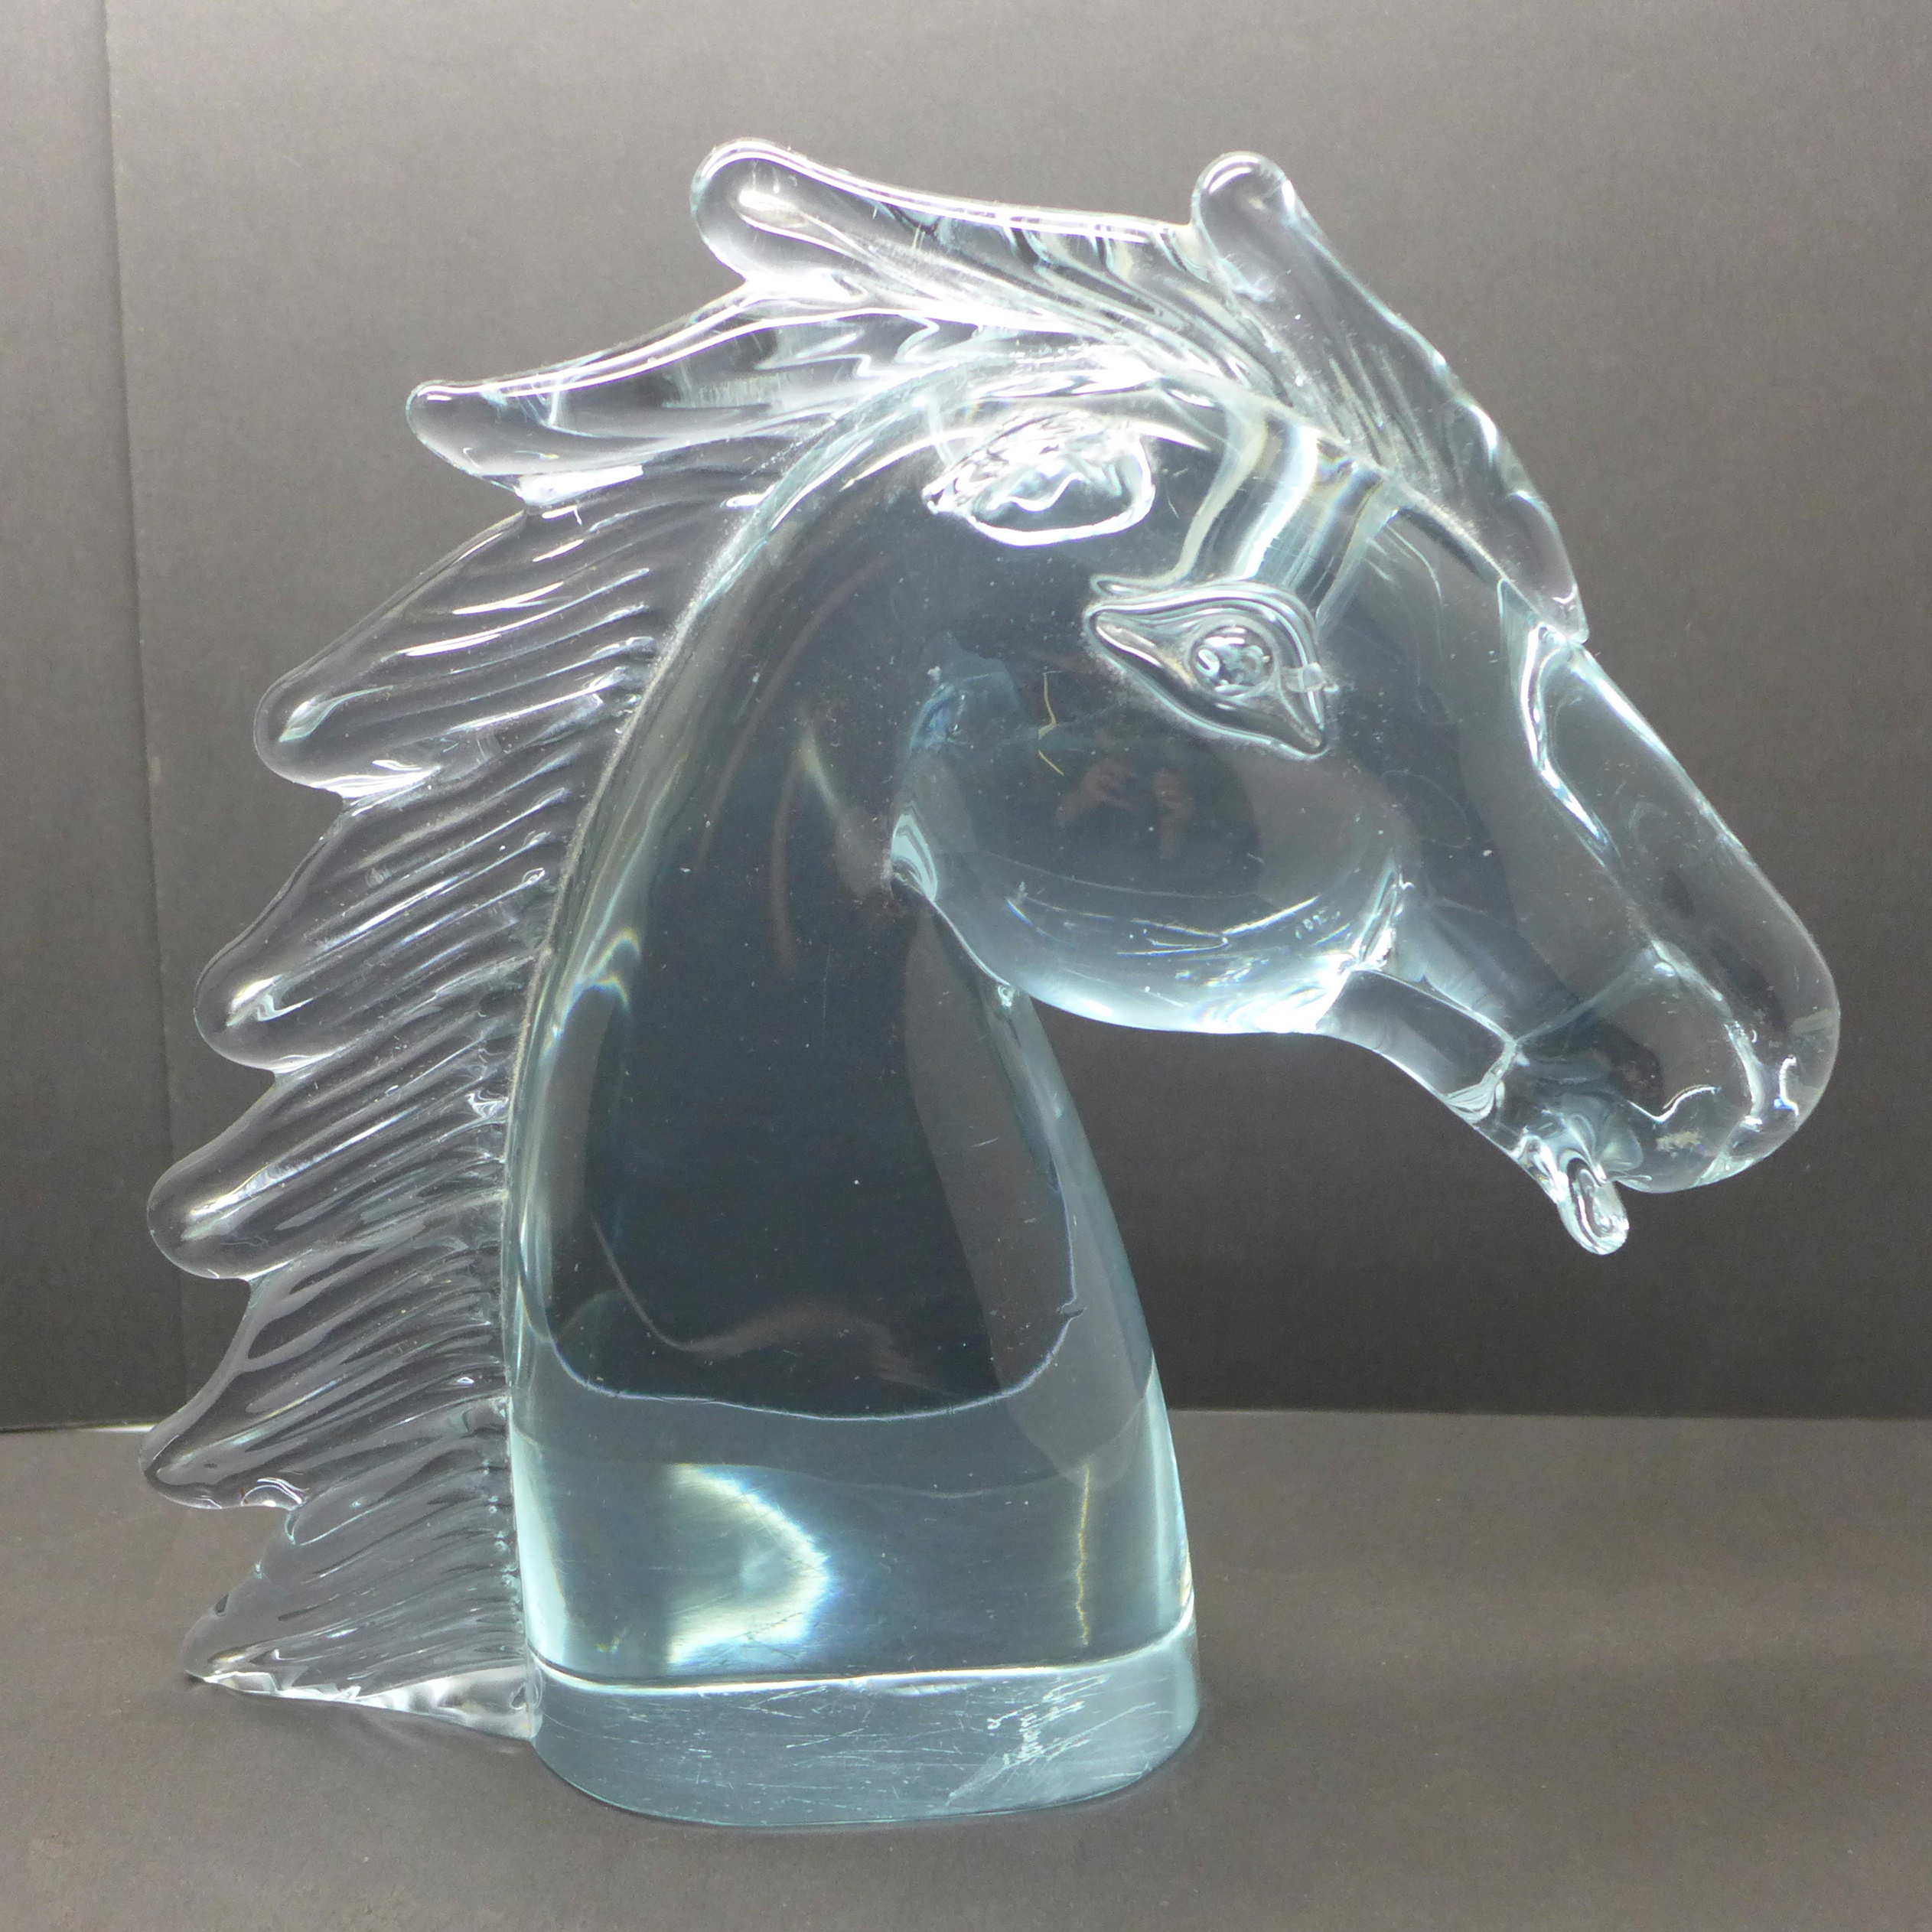 A Horse's head a/f signed by Licio Zanetti - Dichronic glass - changes colour in daylight under